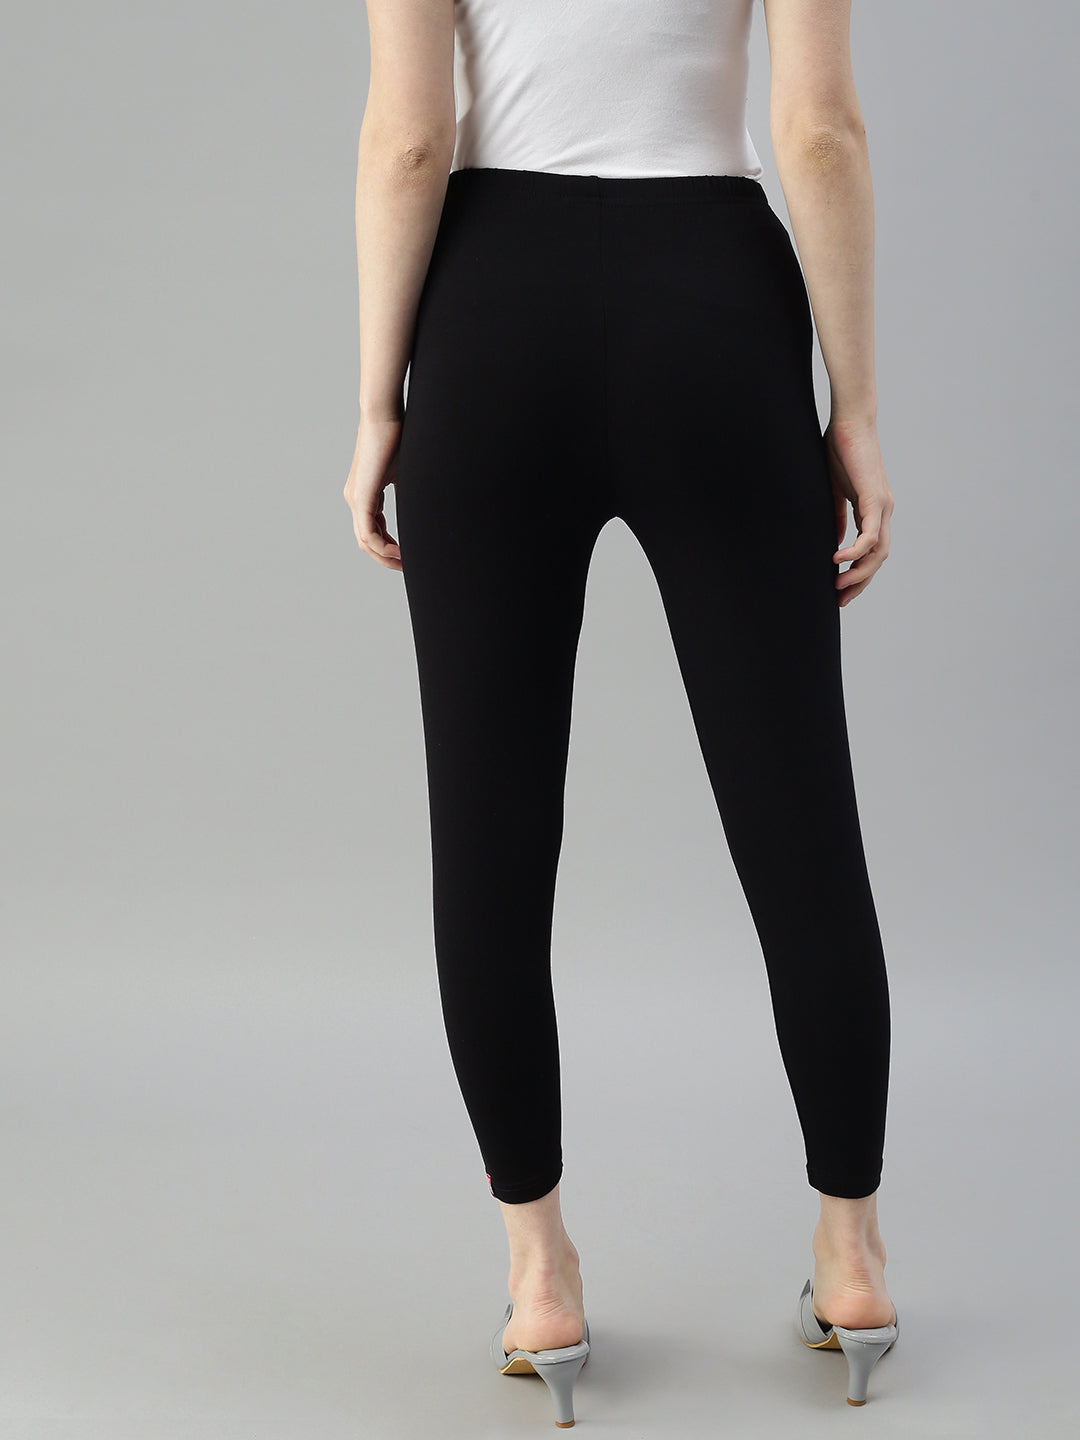 11 Best Lululemon Leggings for All Types of Workouts | Teen Vogue